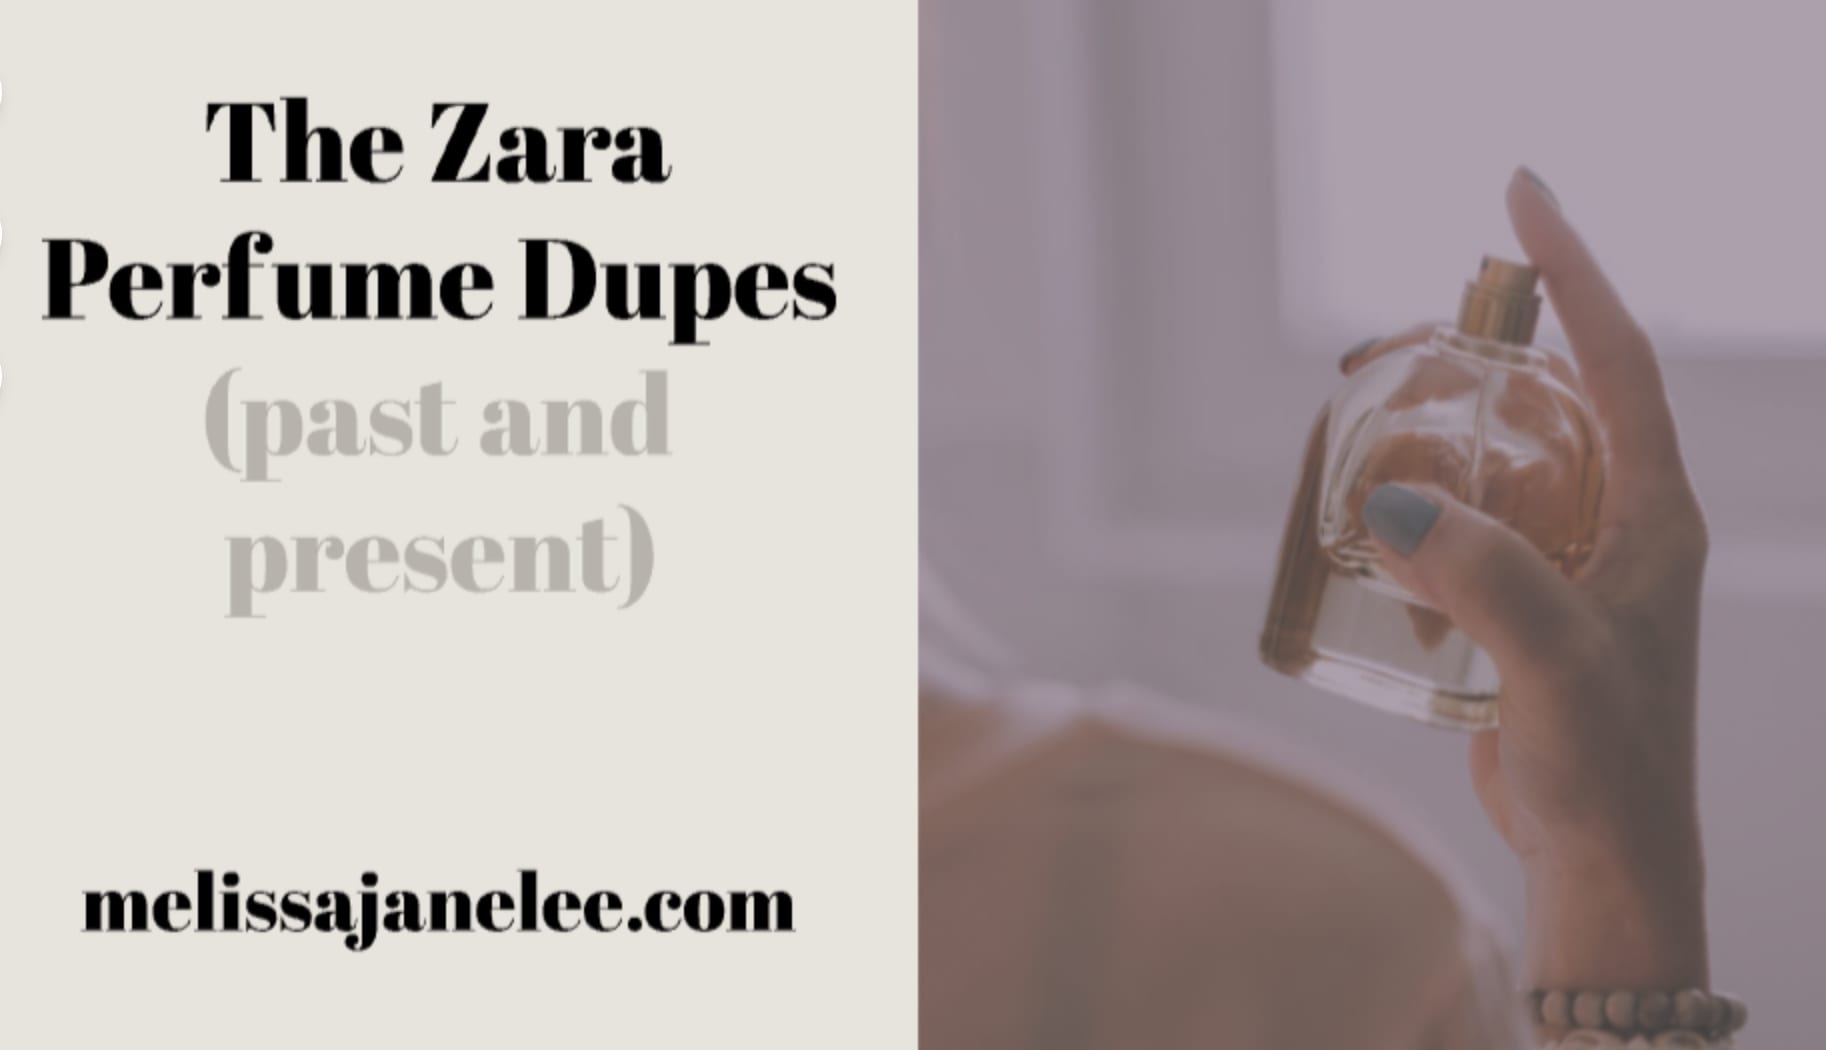 We've found the perfect dupe of the Chloé Signature perfume from Zara